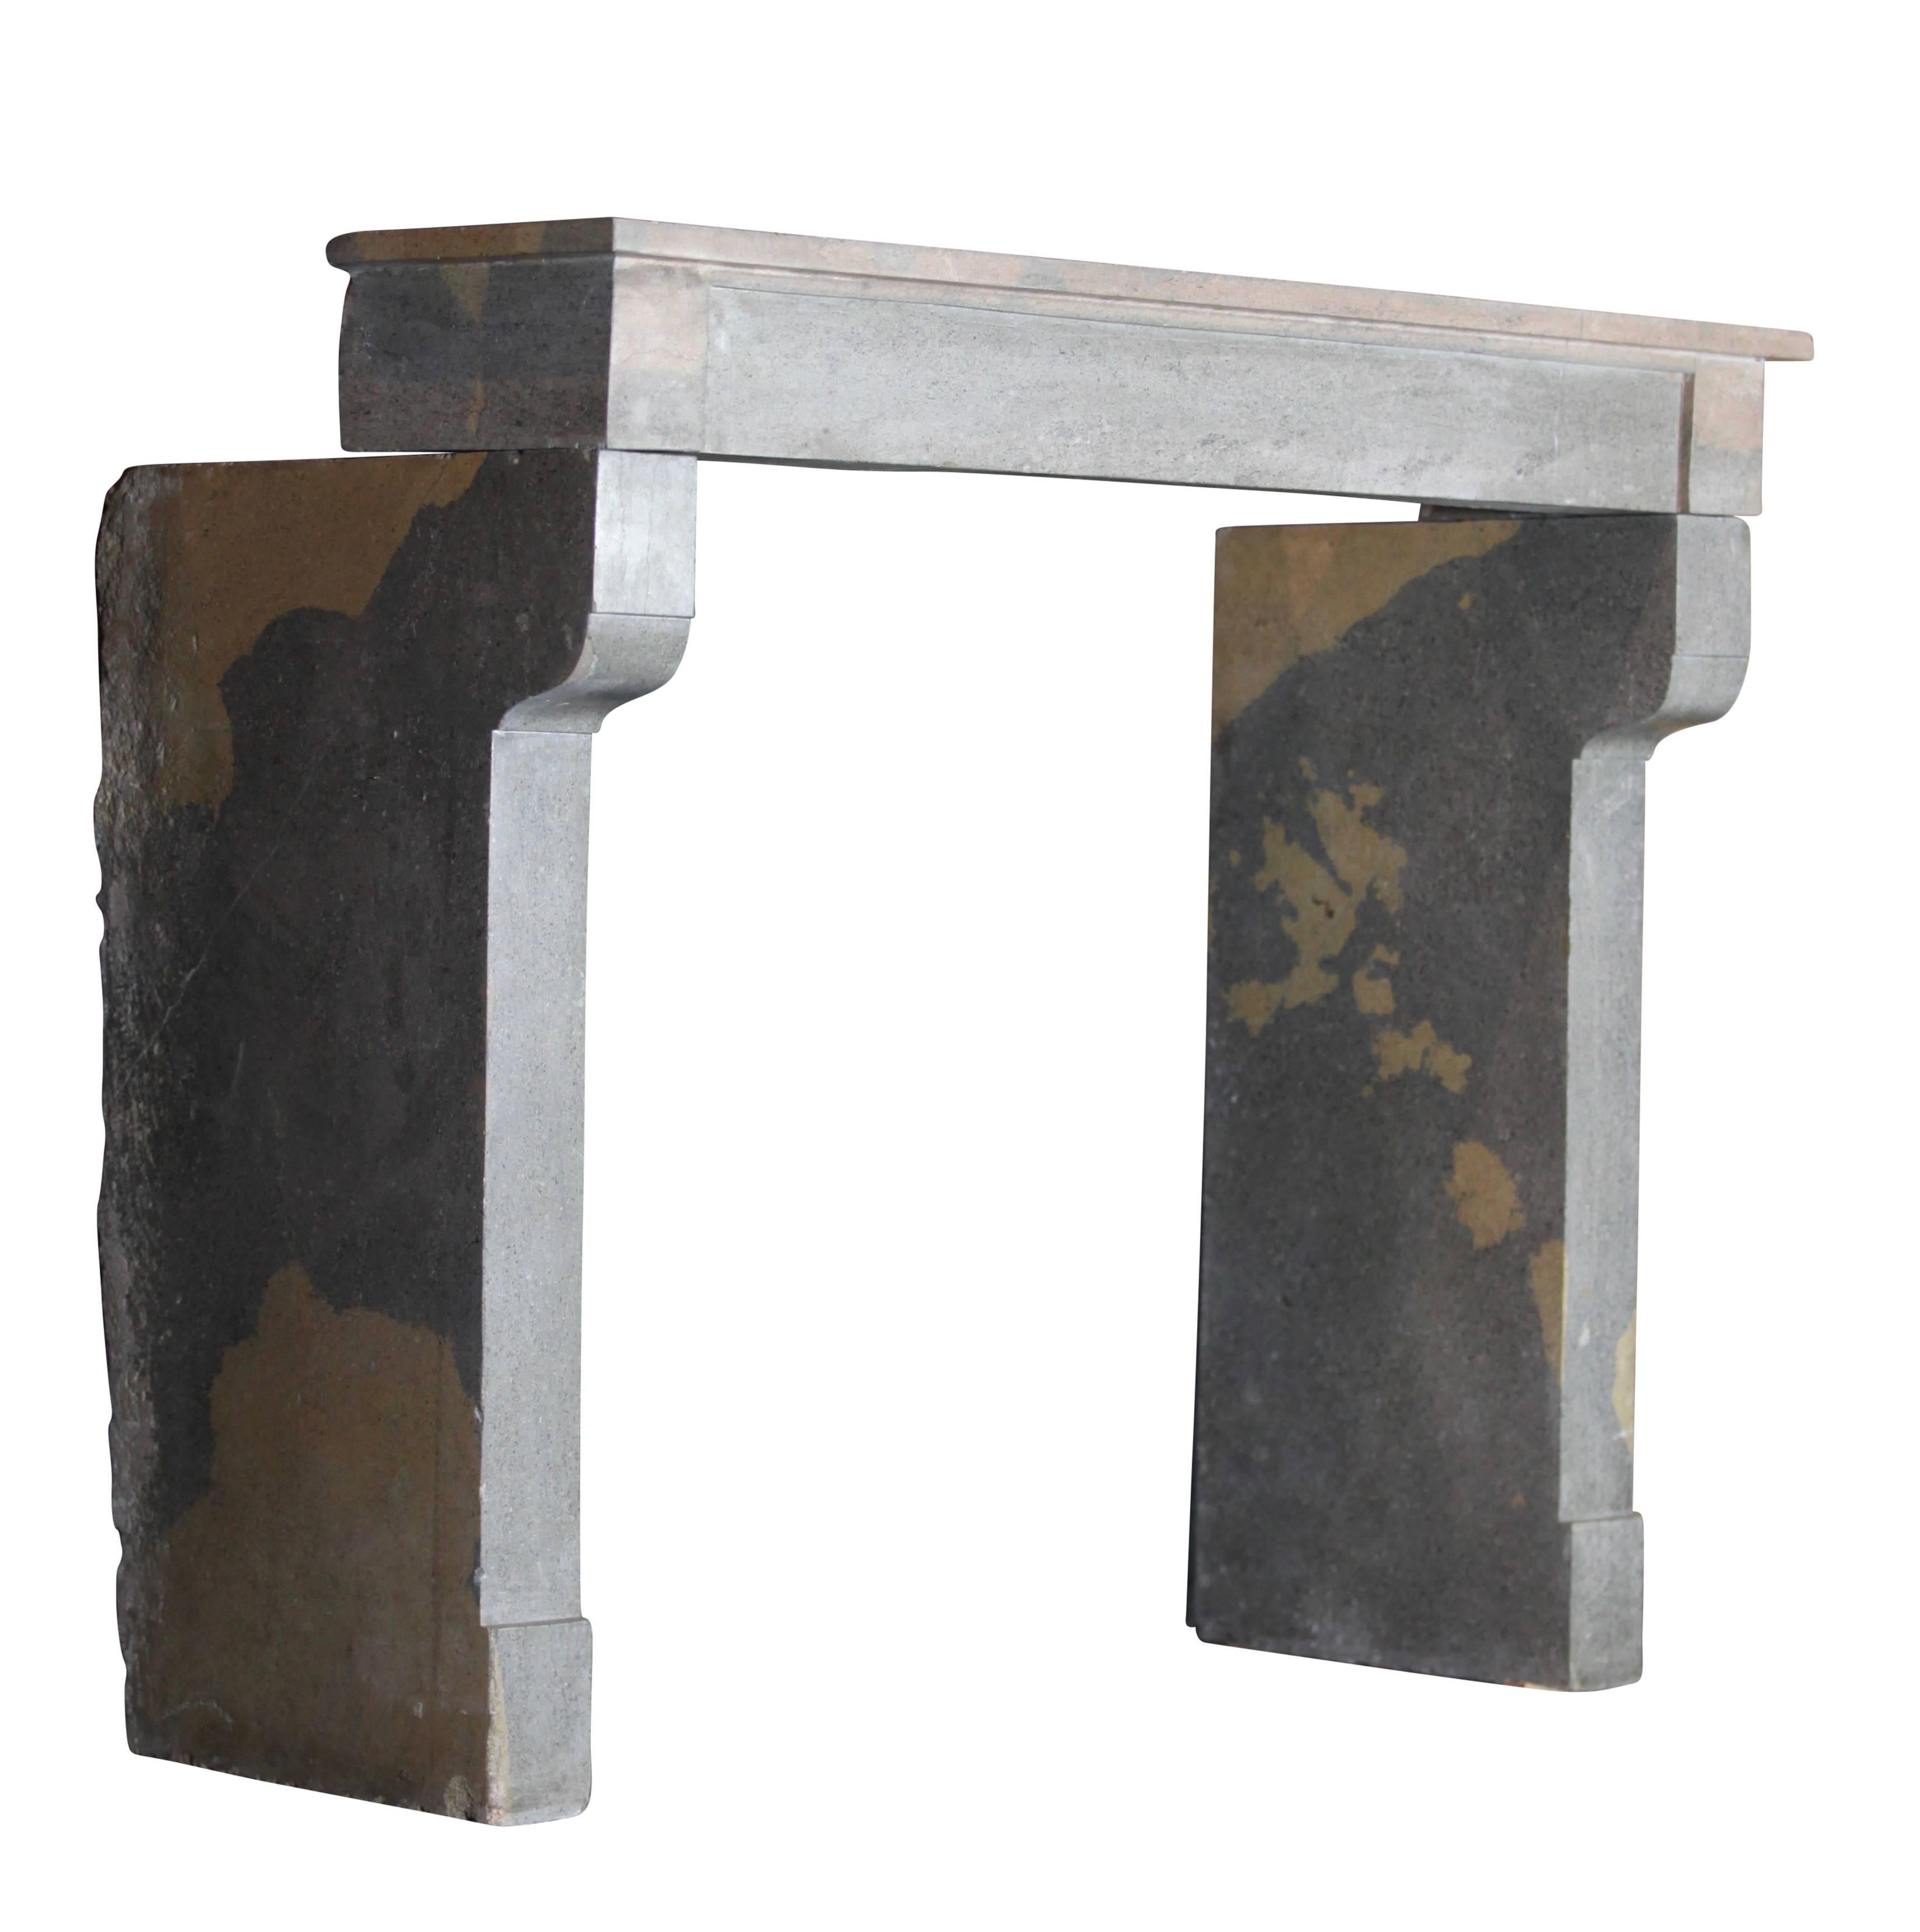 Bicolore Franche-Comté region hard stone fireplace mantle for a timeless chique interior design. It has straight lines and oxidized parts.
Measures:
125 cm EW 49.21